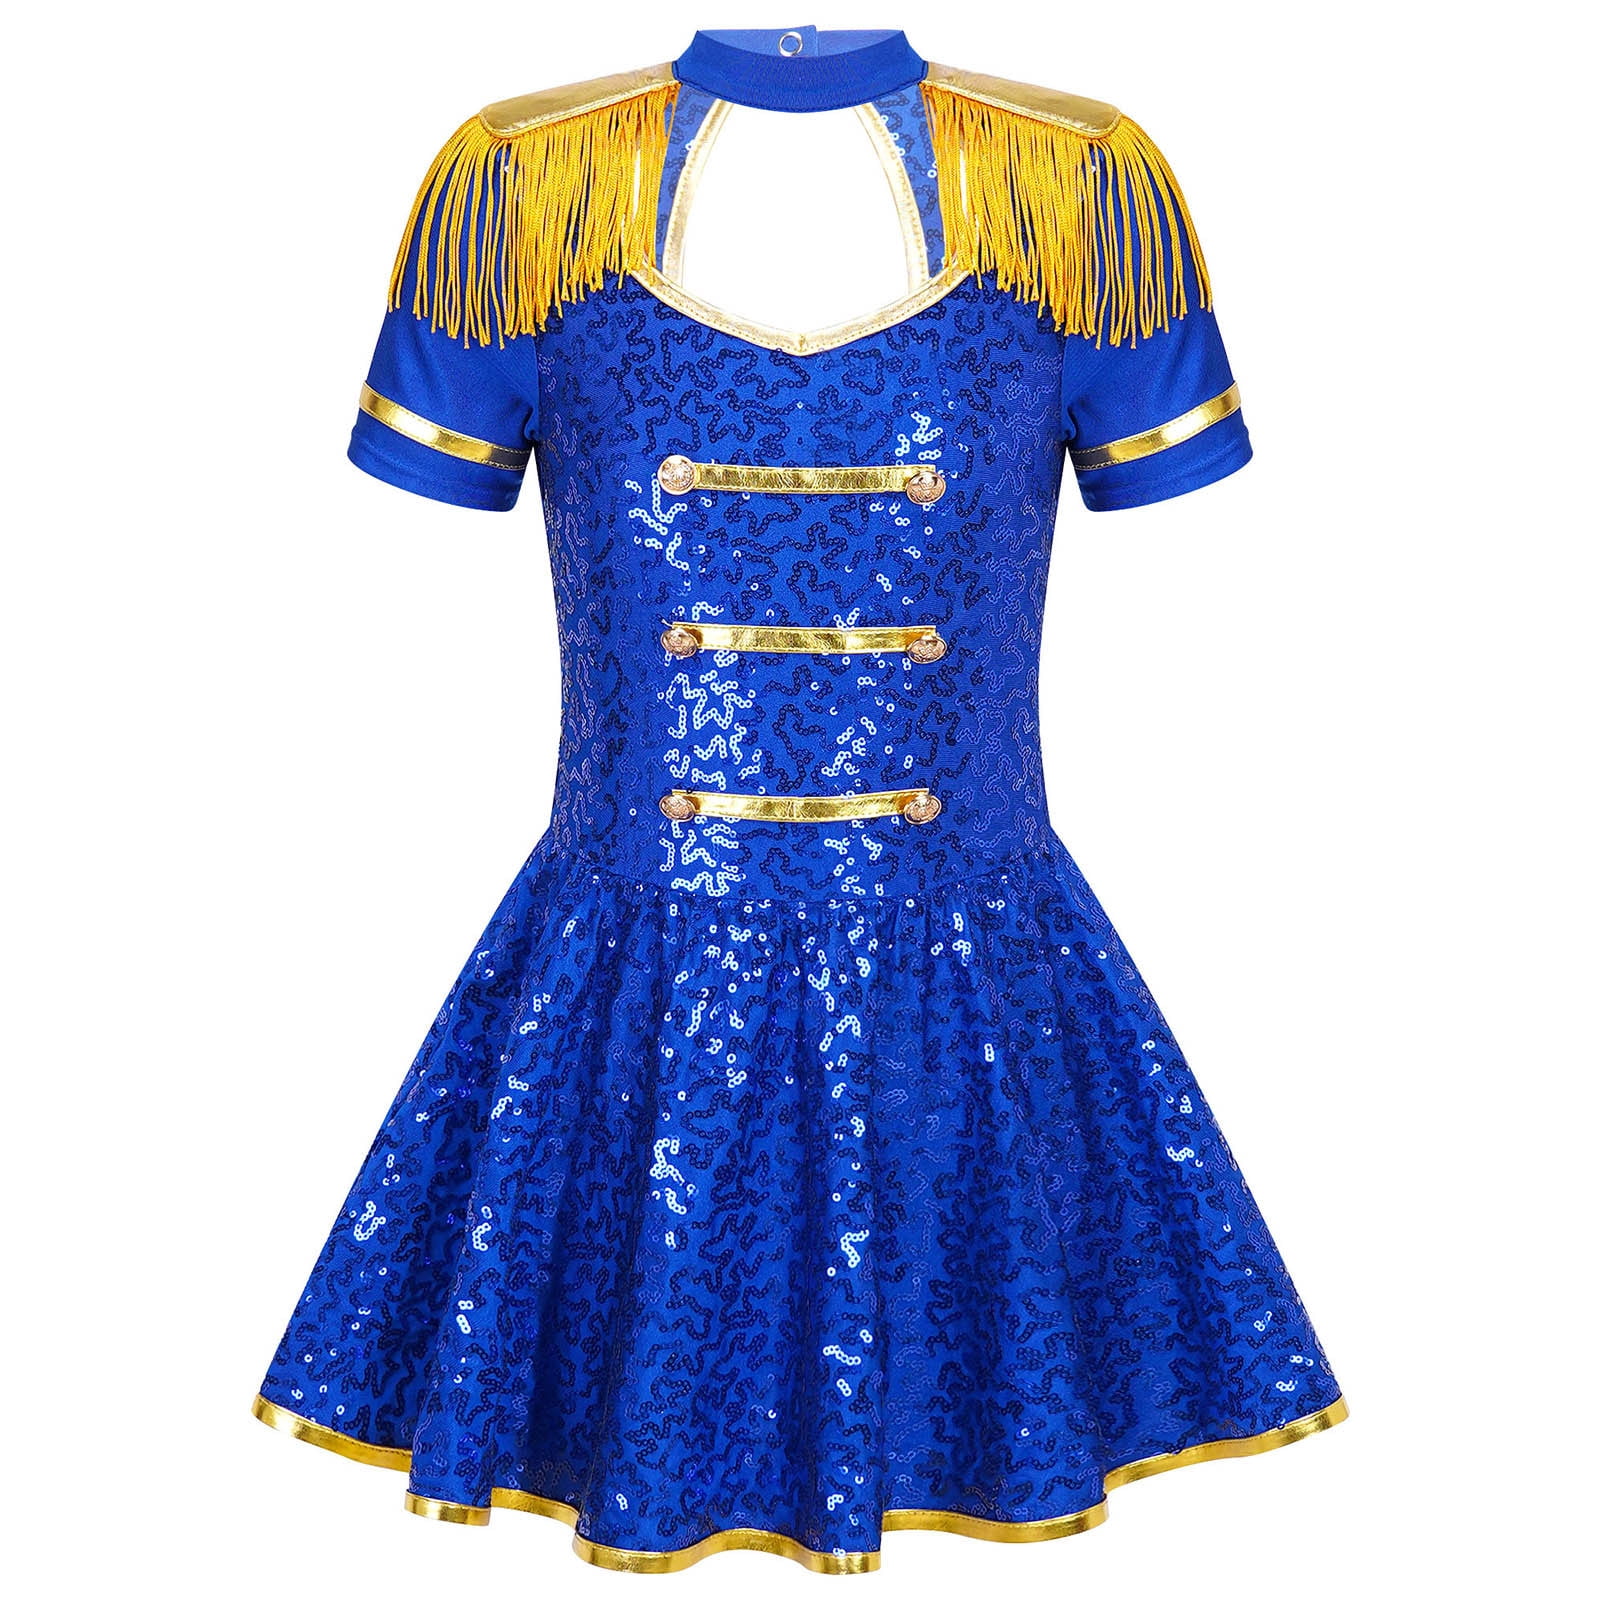 MSemis Kids Girls Circus Show Ringmaster Costume Party Dance Outfits Halloween Fancy Dress Up Royal Blue 8 98e941bb a795 4a15 a066 246ee33d69a7.28ca4ec95361b0f2b72b4aec07ec58d9